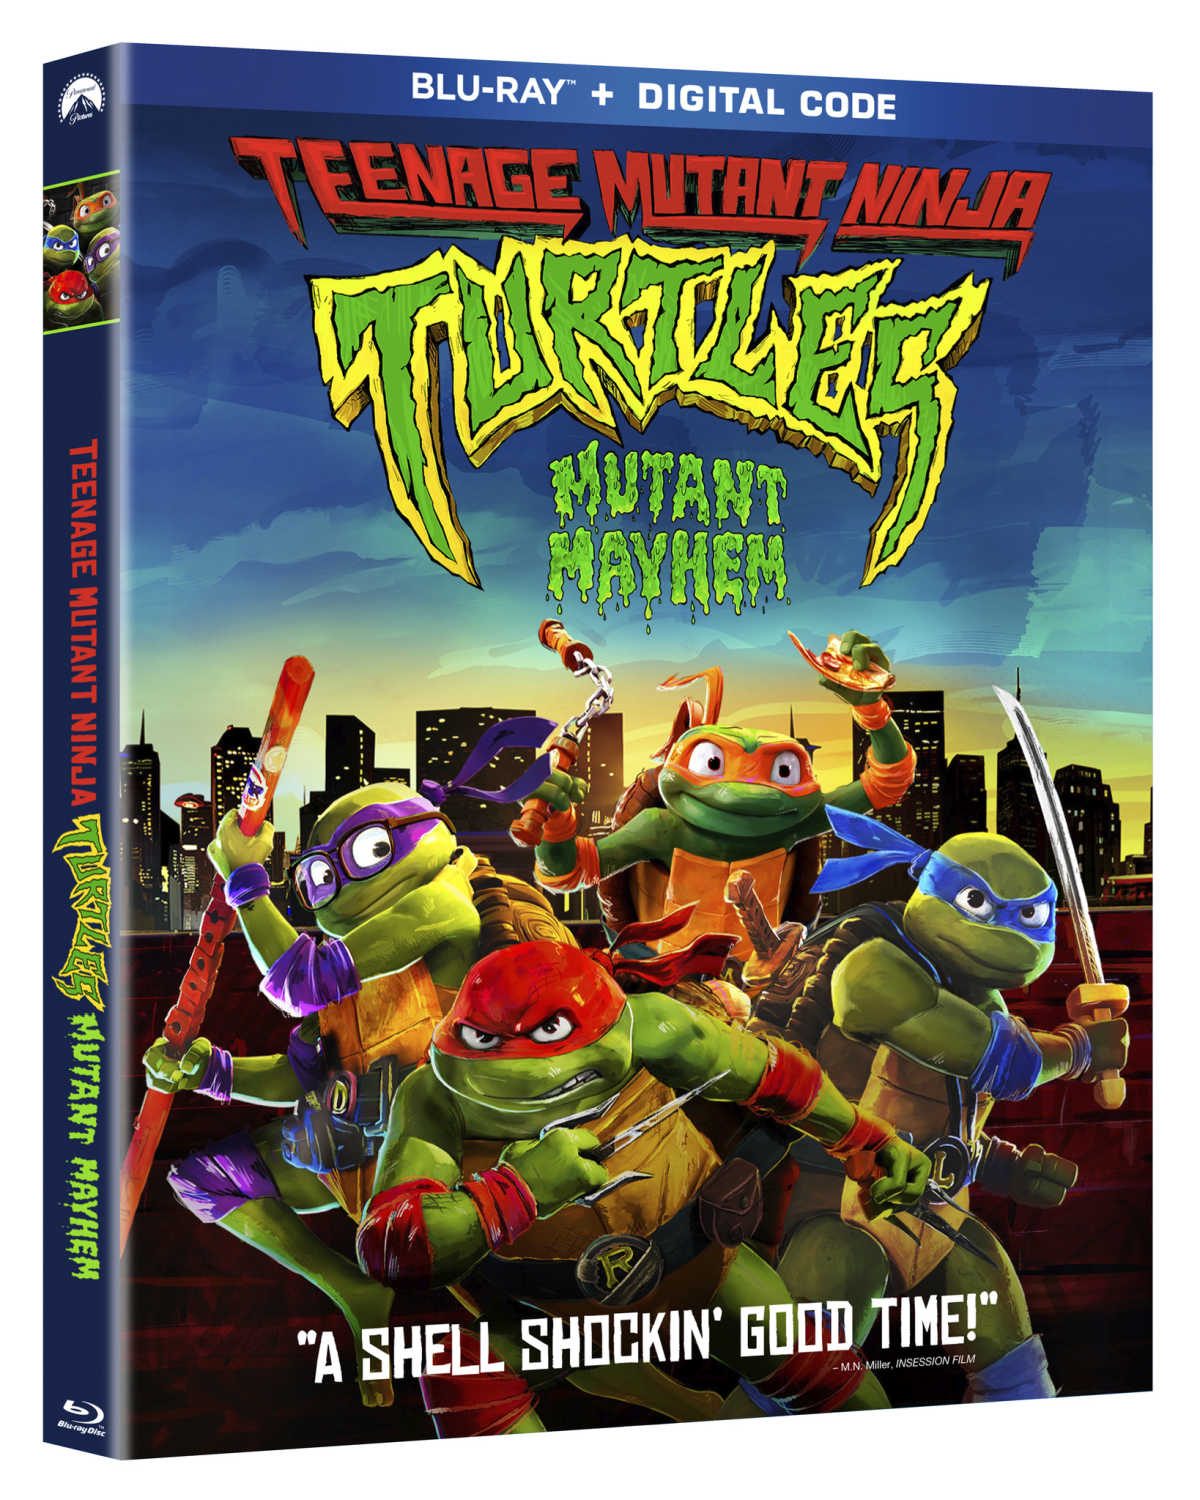 Cowabunga! The Teenage Mutant Ninja Turtles return in an all-new Mutant Mayhem animated adventure, packed with action, humor, and a heartwarming message.